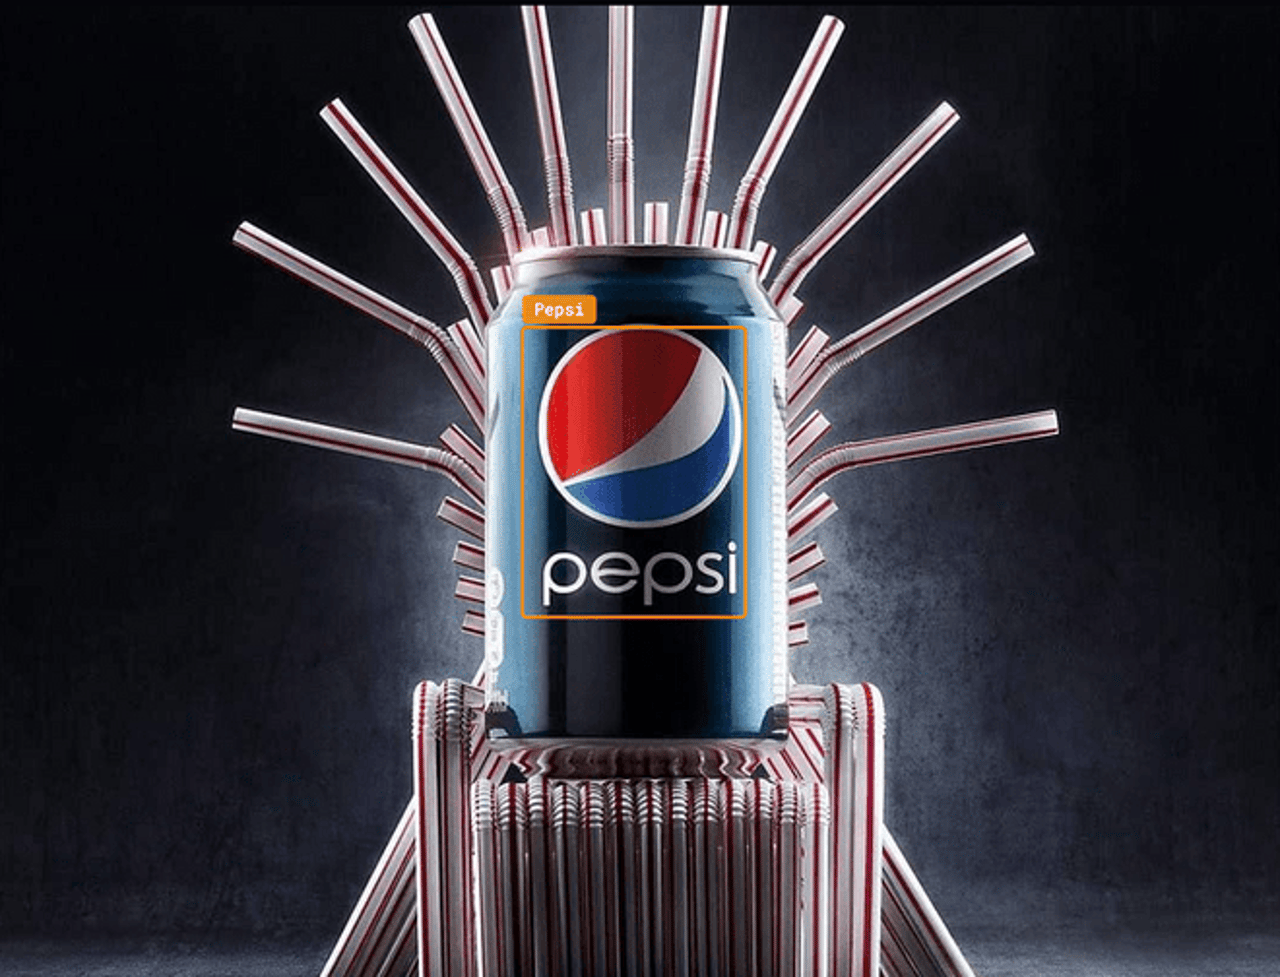 PepsiCo and Game of Thrones